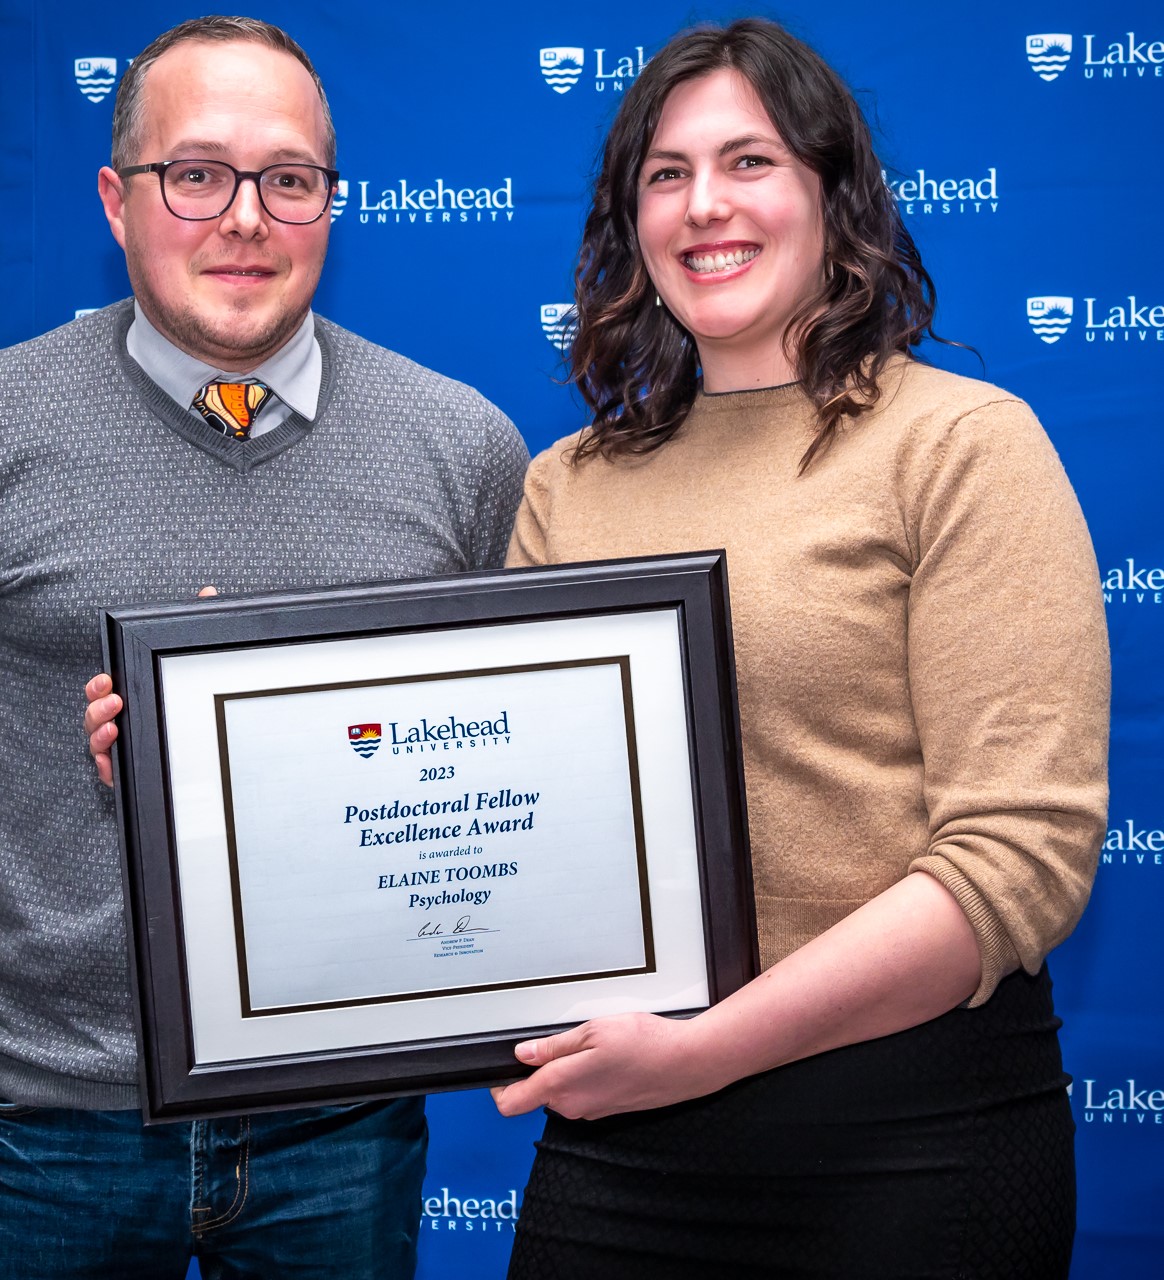 Photo of Post-Doctoral Fellow Excellence Award Winner Dr. Elaine Toombs, Department of  of Psychology, with Supervisor Dr. Chris Mushquash